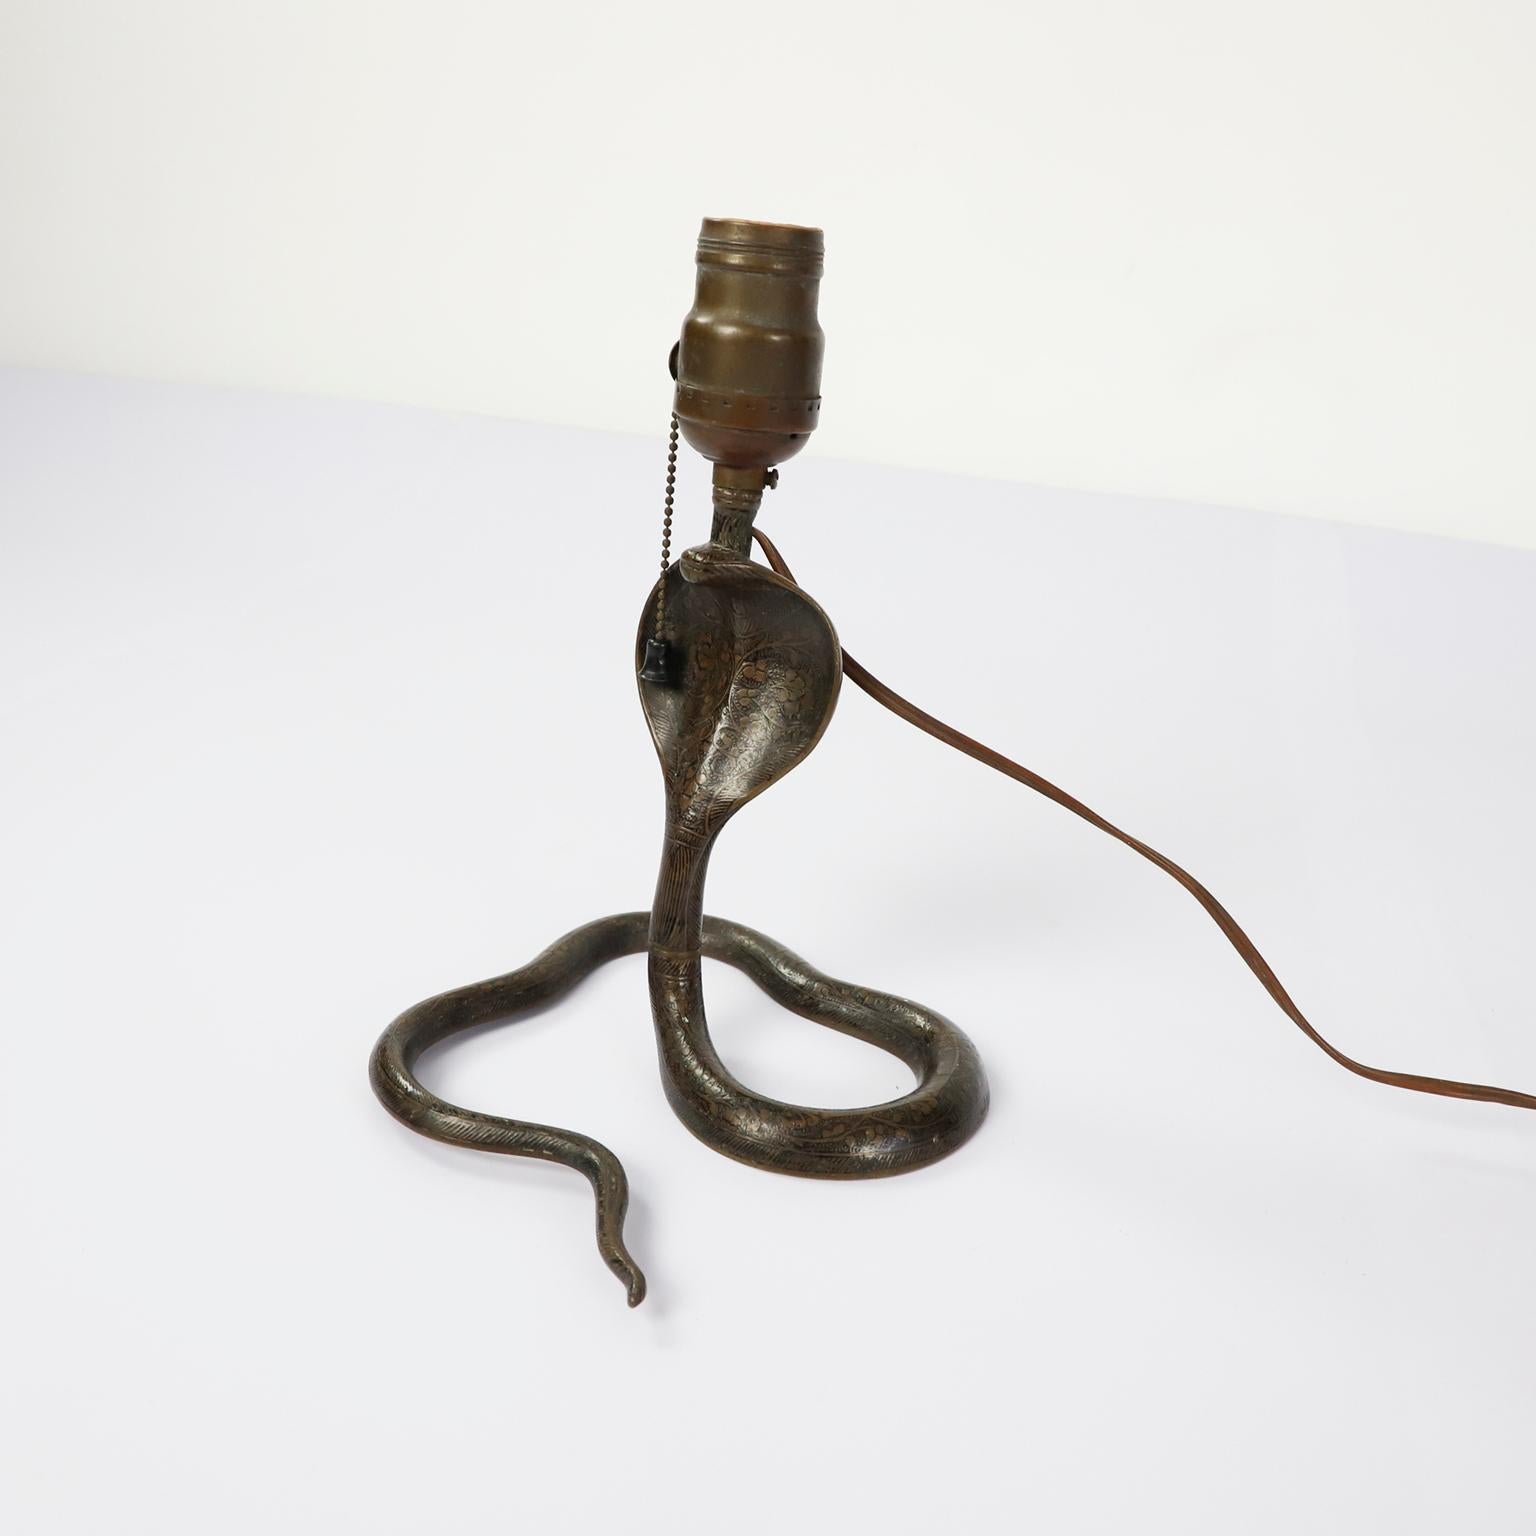 Circa 1940. We offer this rare Antique Cobra table lamp made in solid brass.